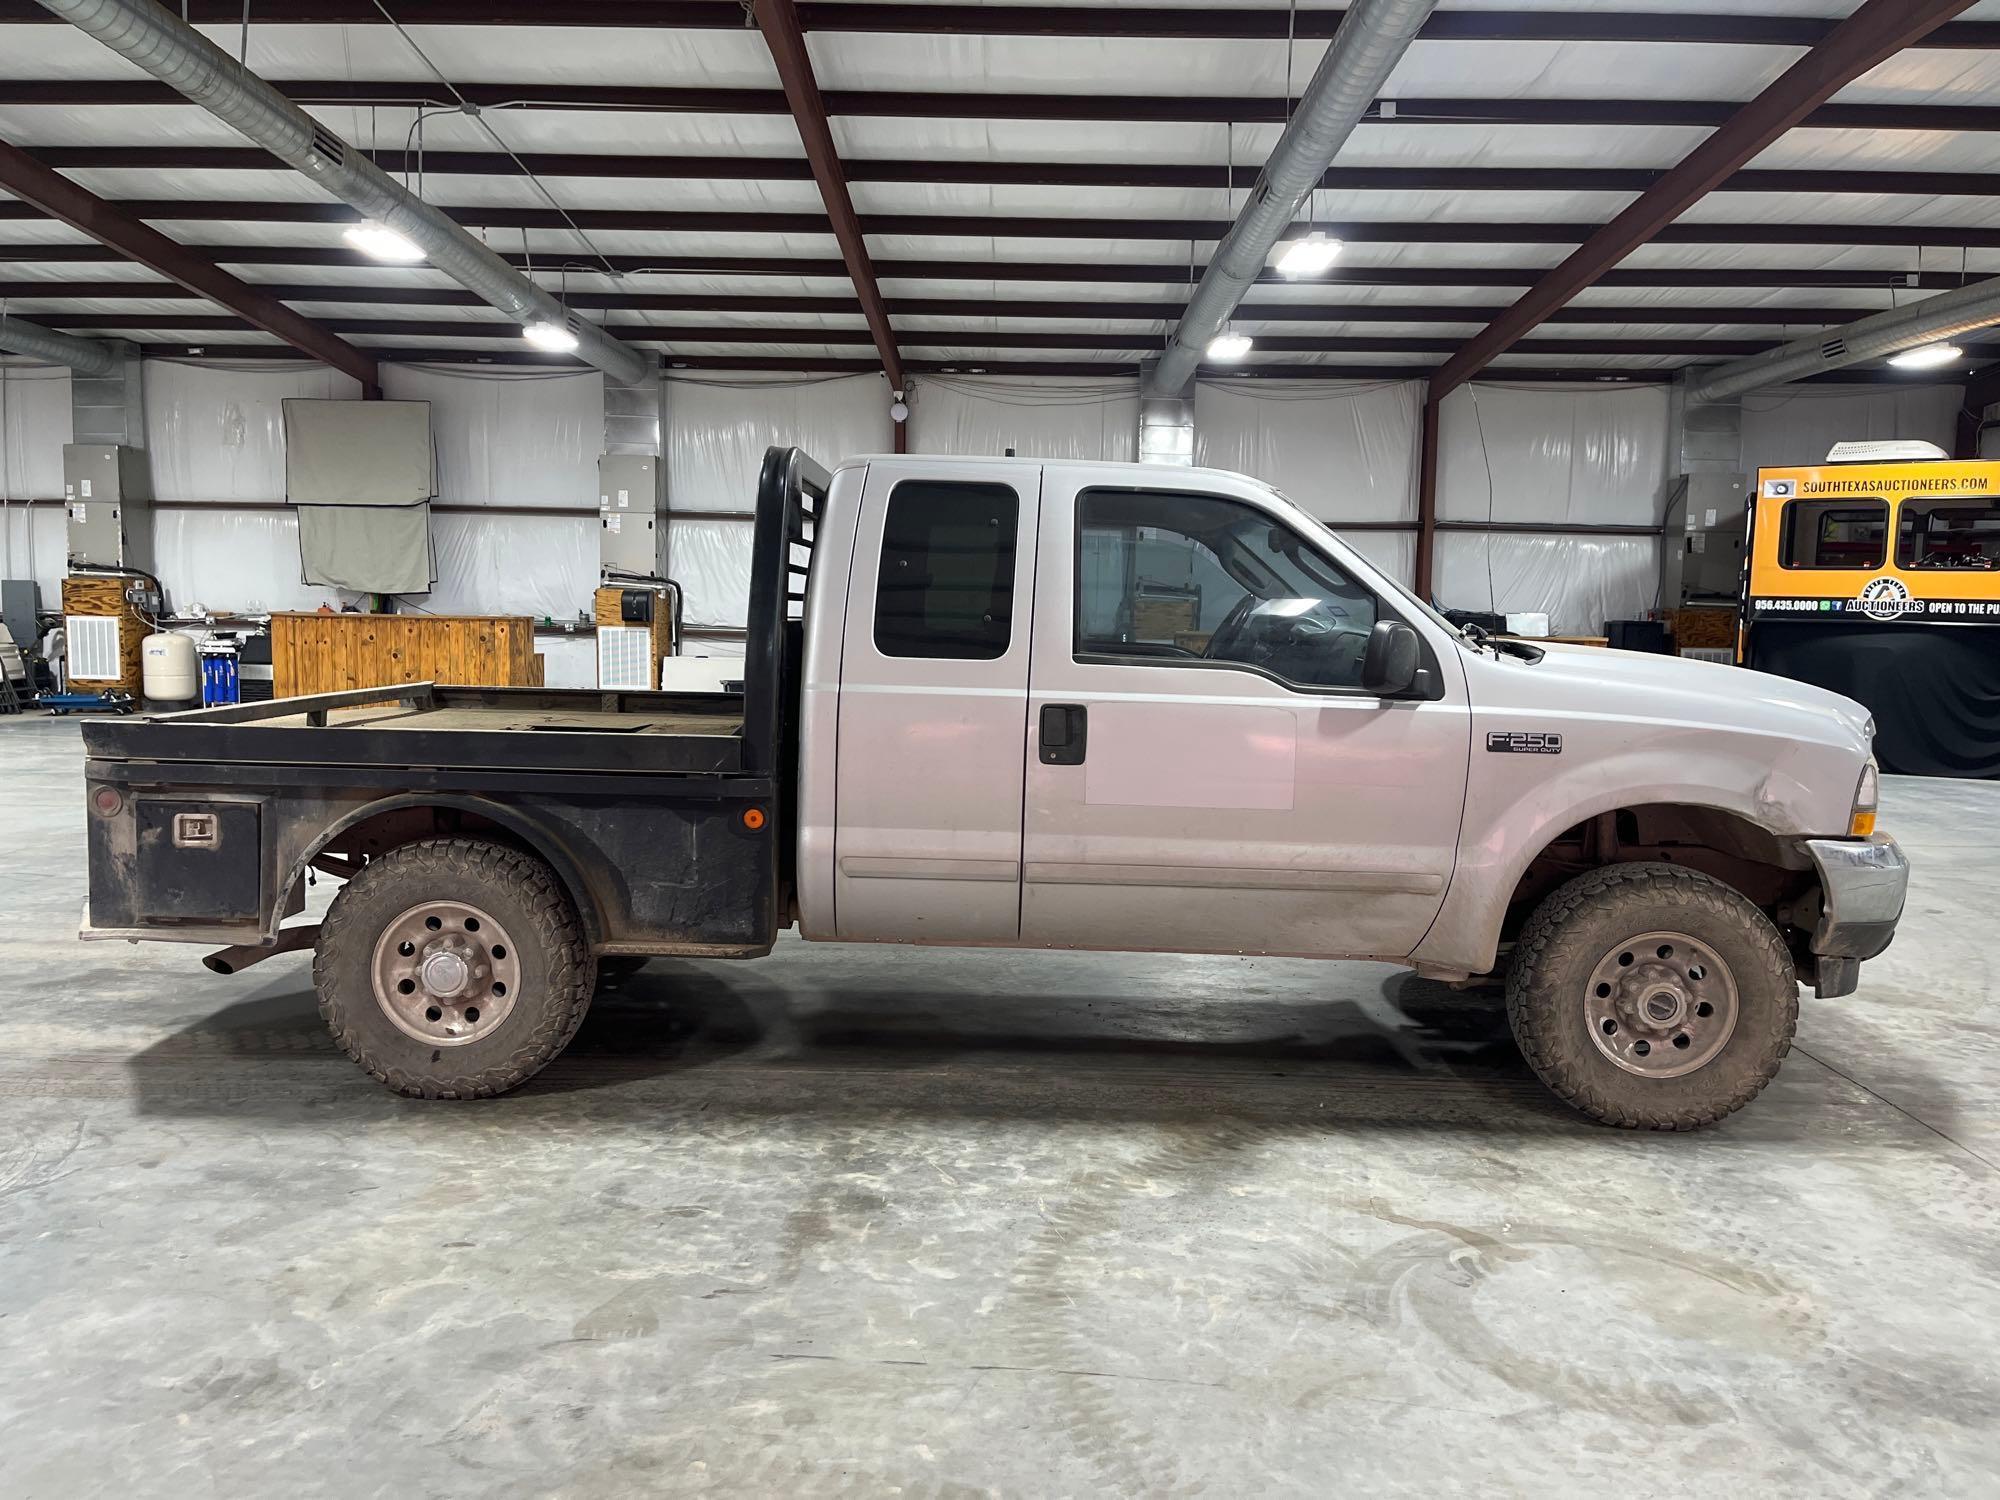 2003 Ford F250 Super Duty Flatbed Truck